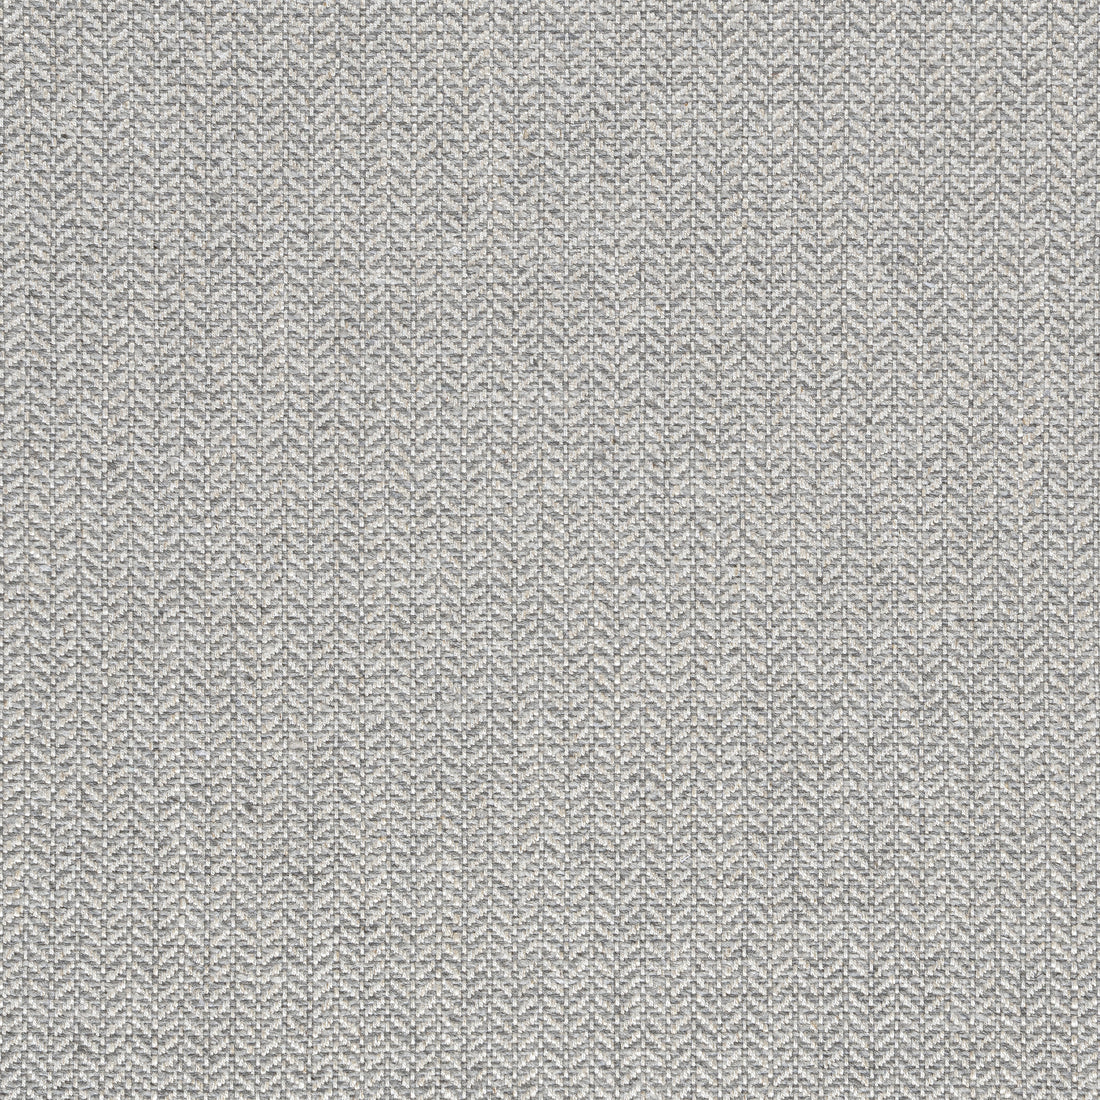 Heath fabric in smoke color - pattern number W80930 - by Thibaut in the Dunmore collection